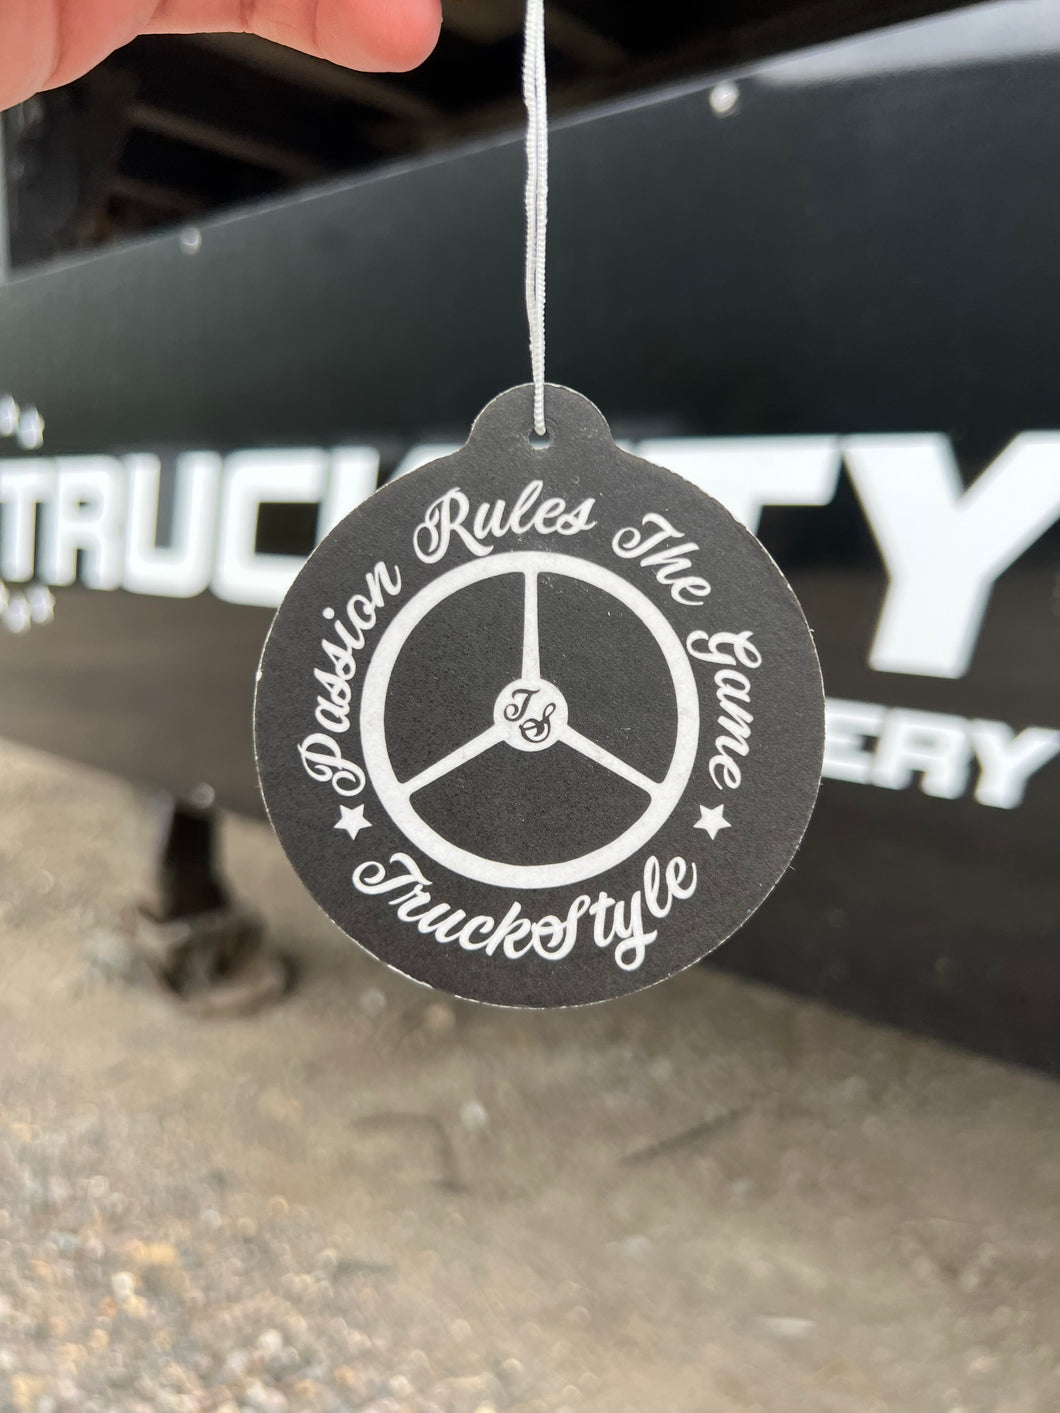 TruckStyle Passion Rules Air Freshener